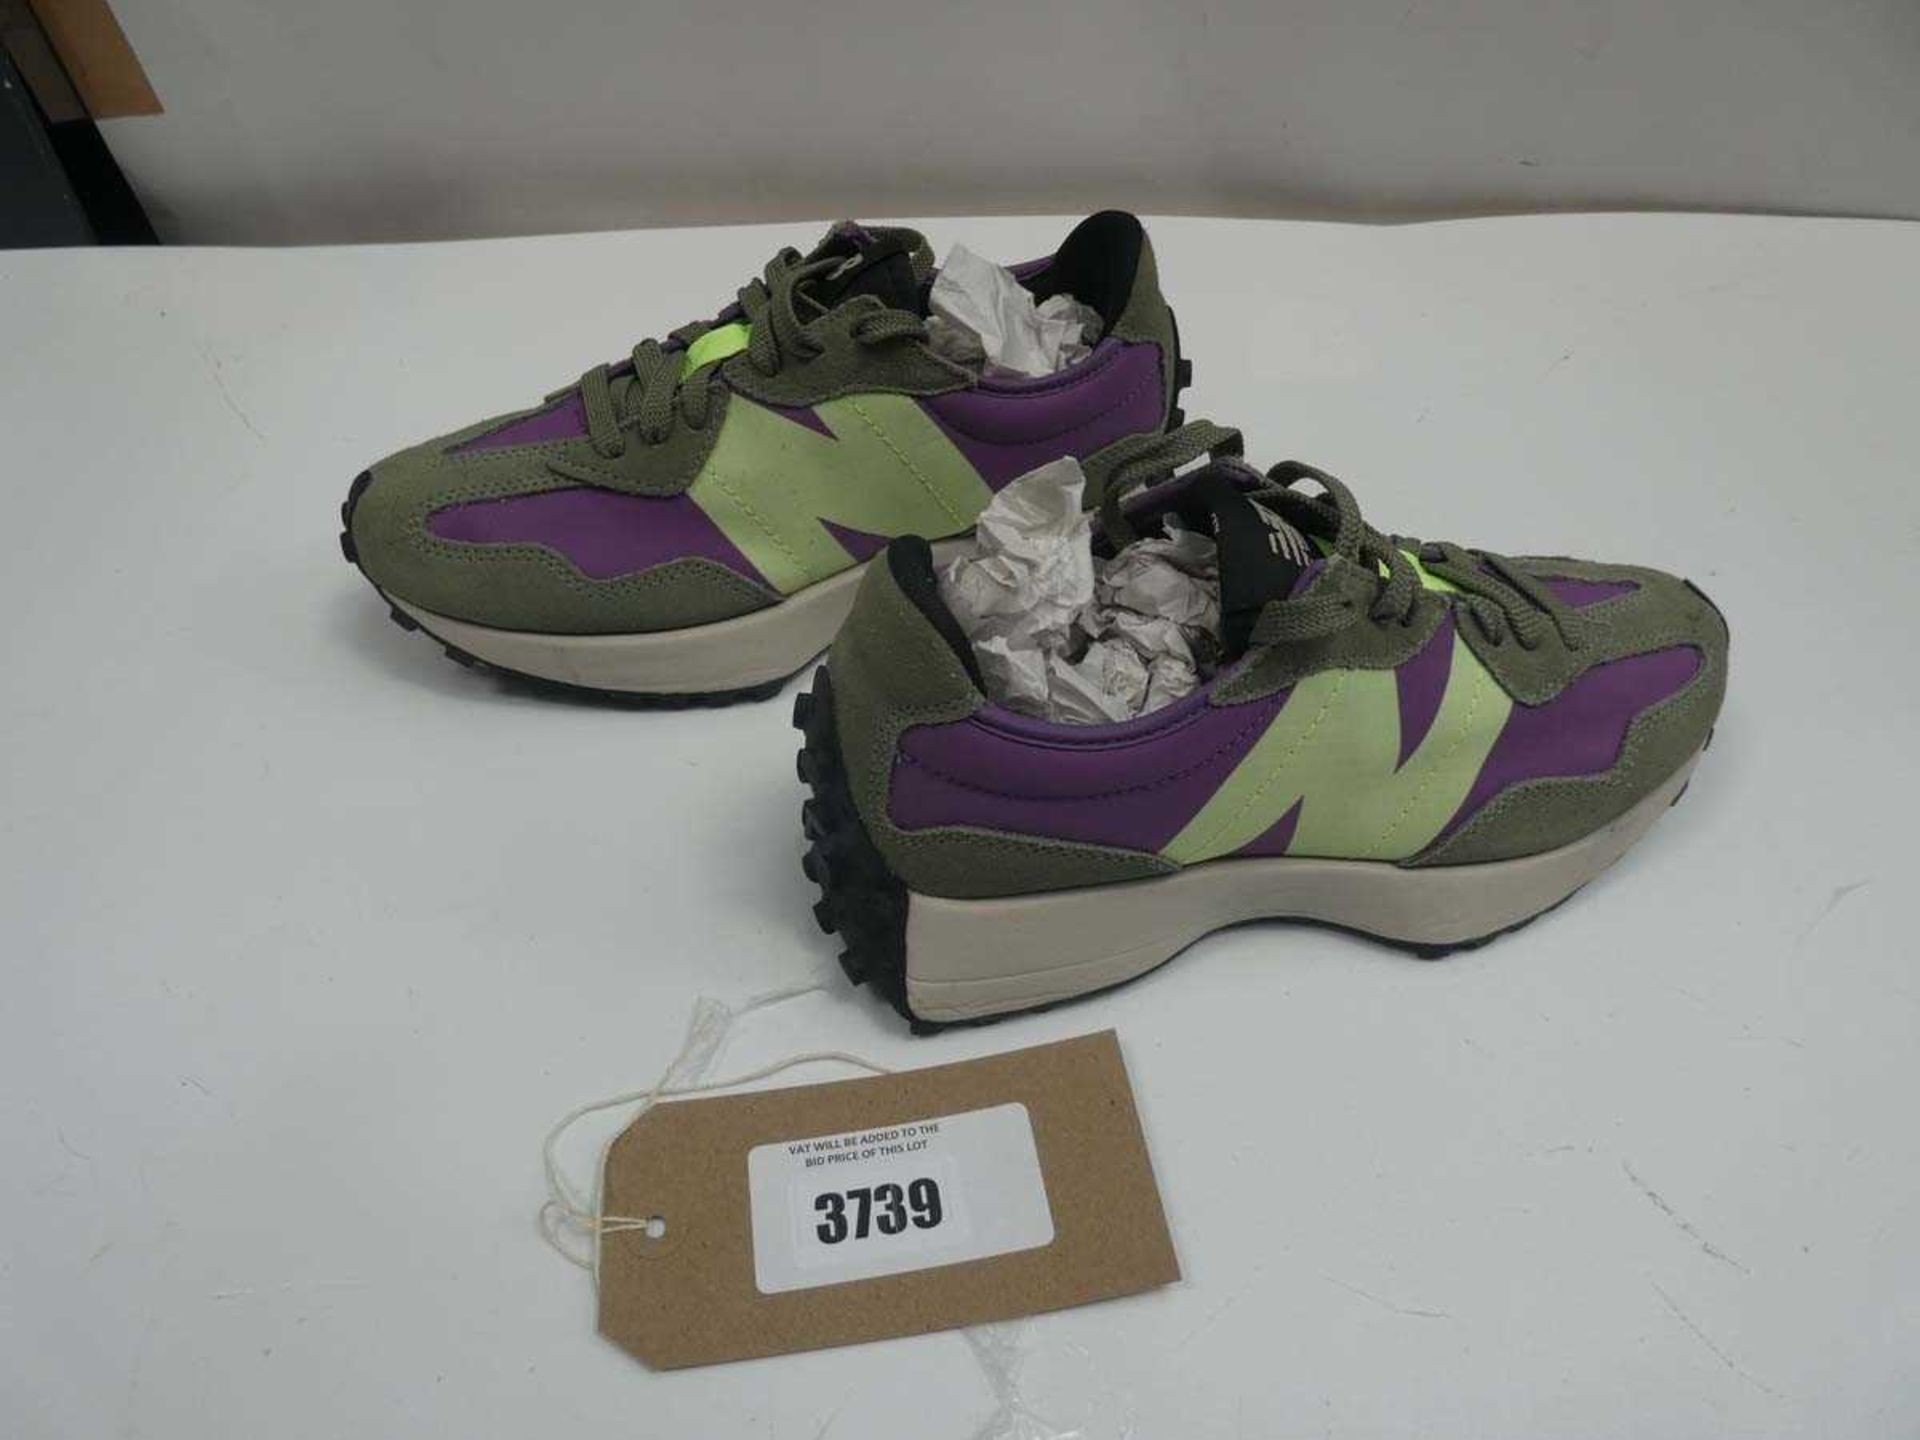 +VAT Pair of New Balance trainers in green / plum, size UK 5